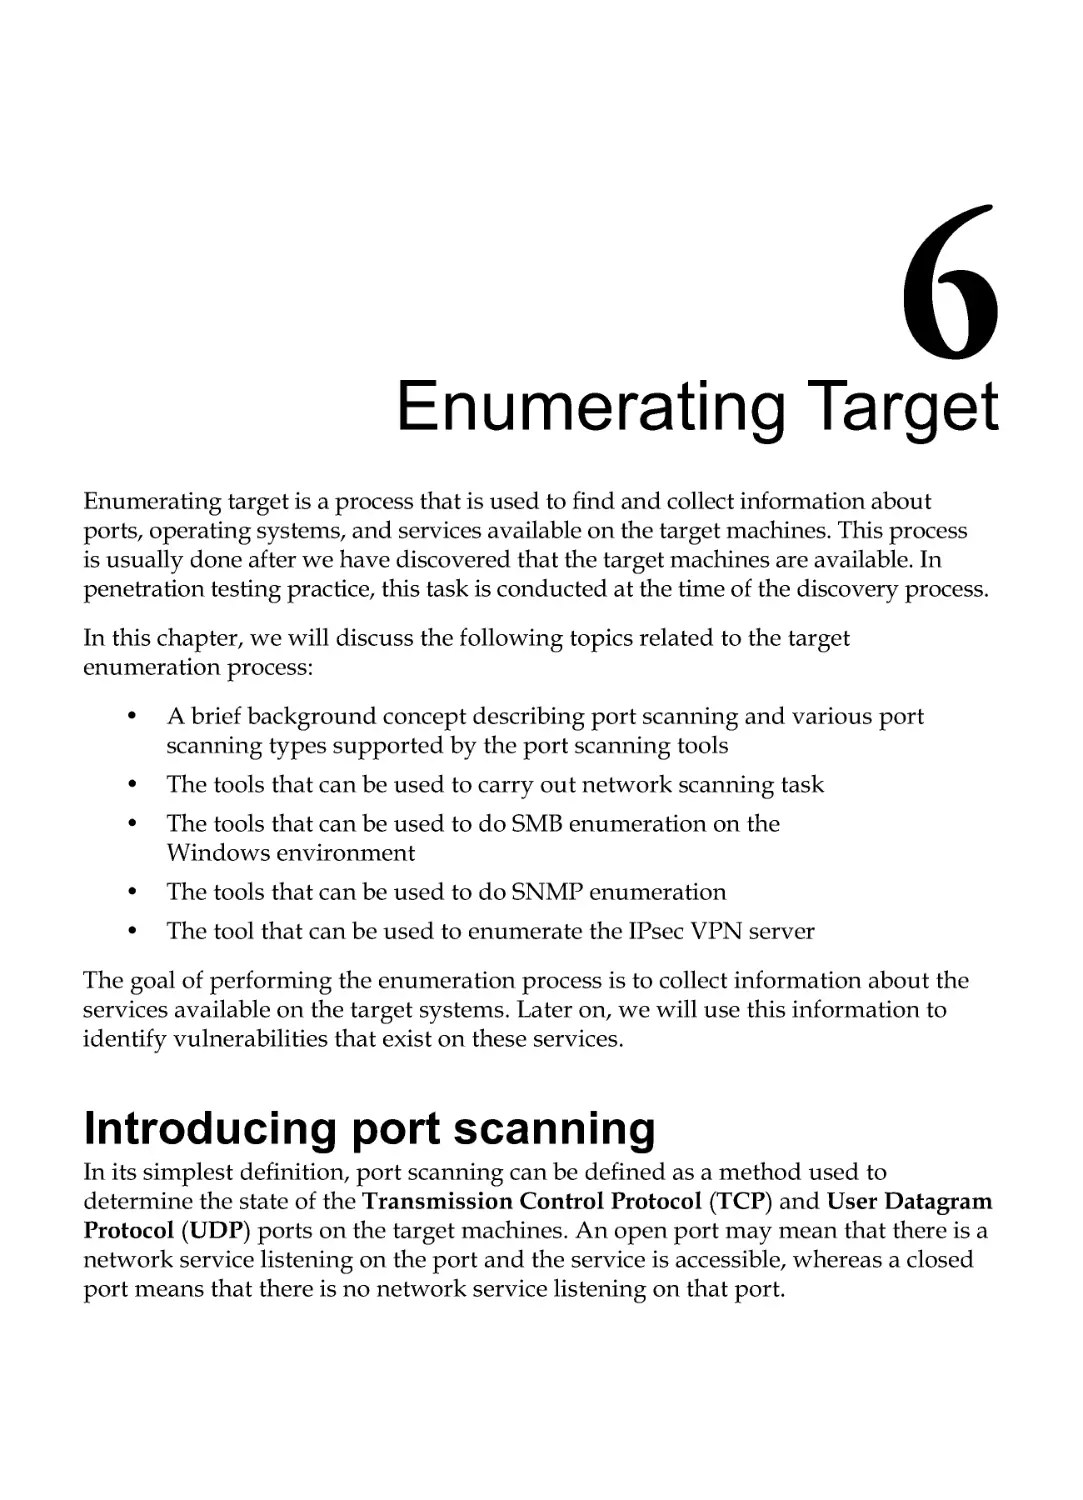 Chapter 6: Enumerating Target